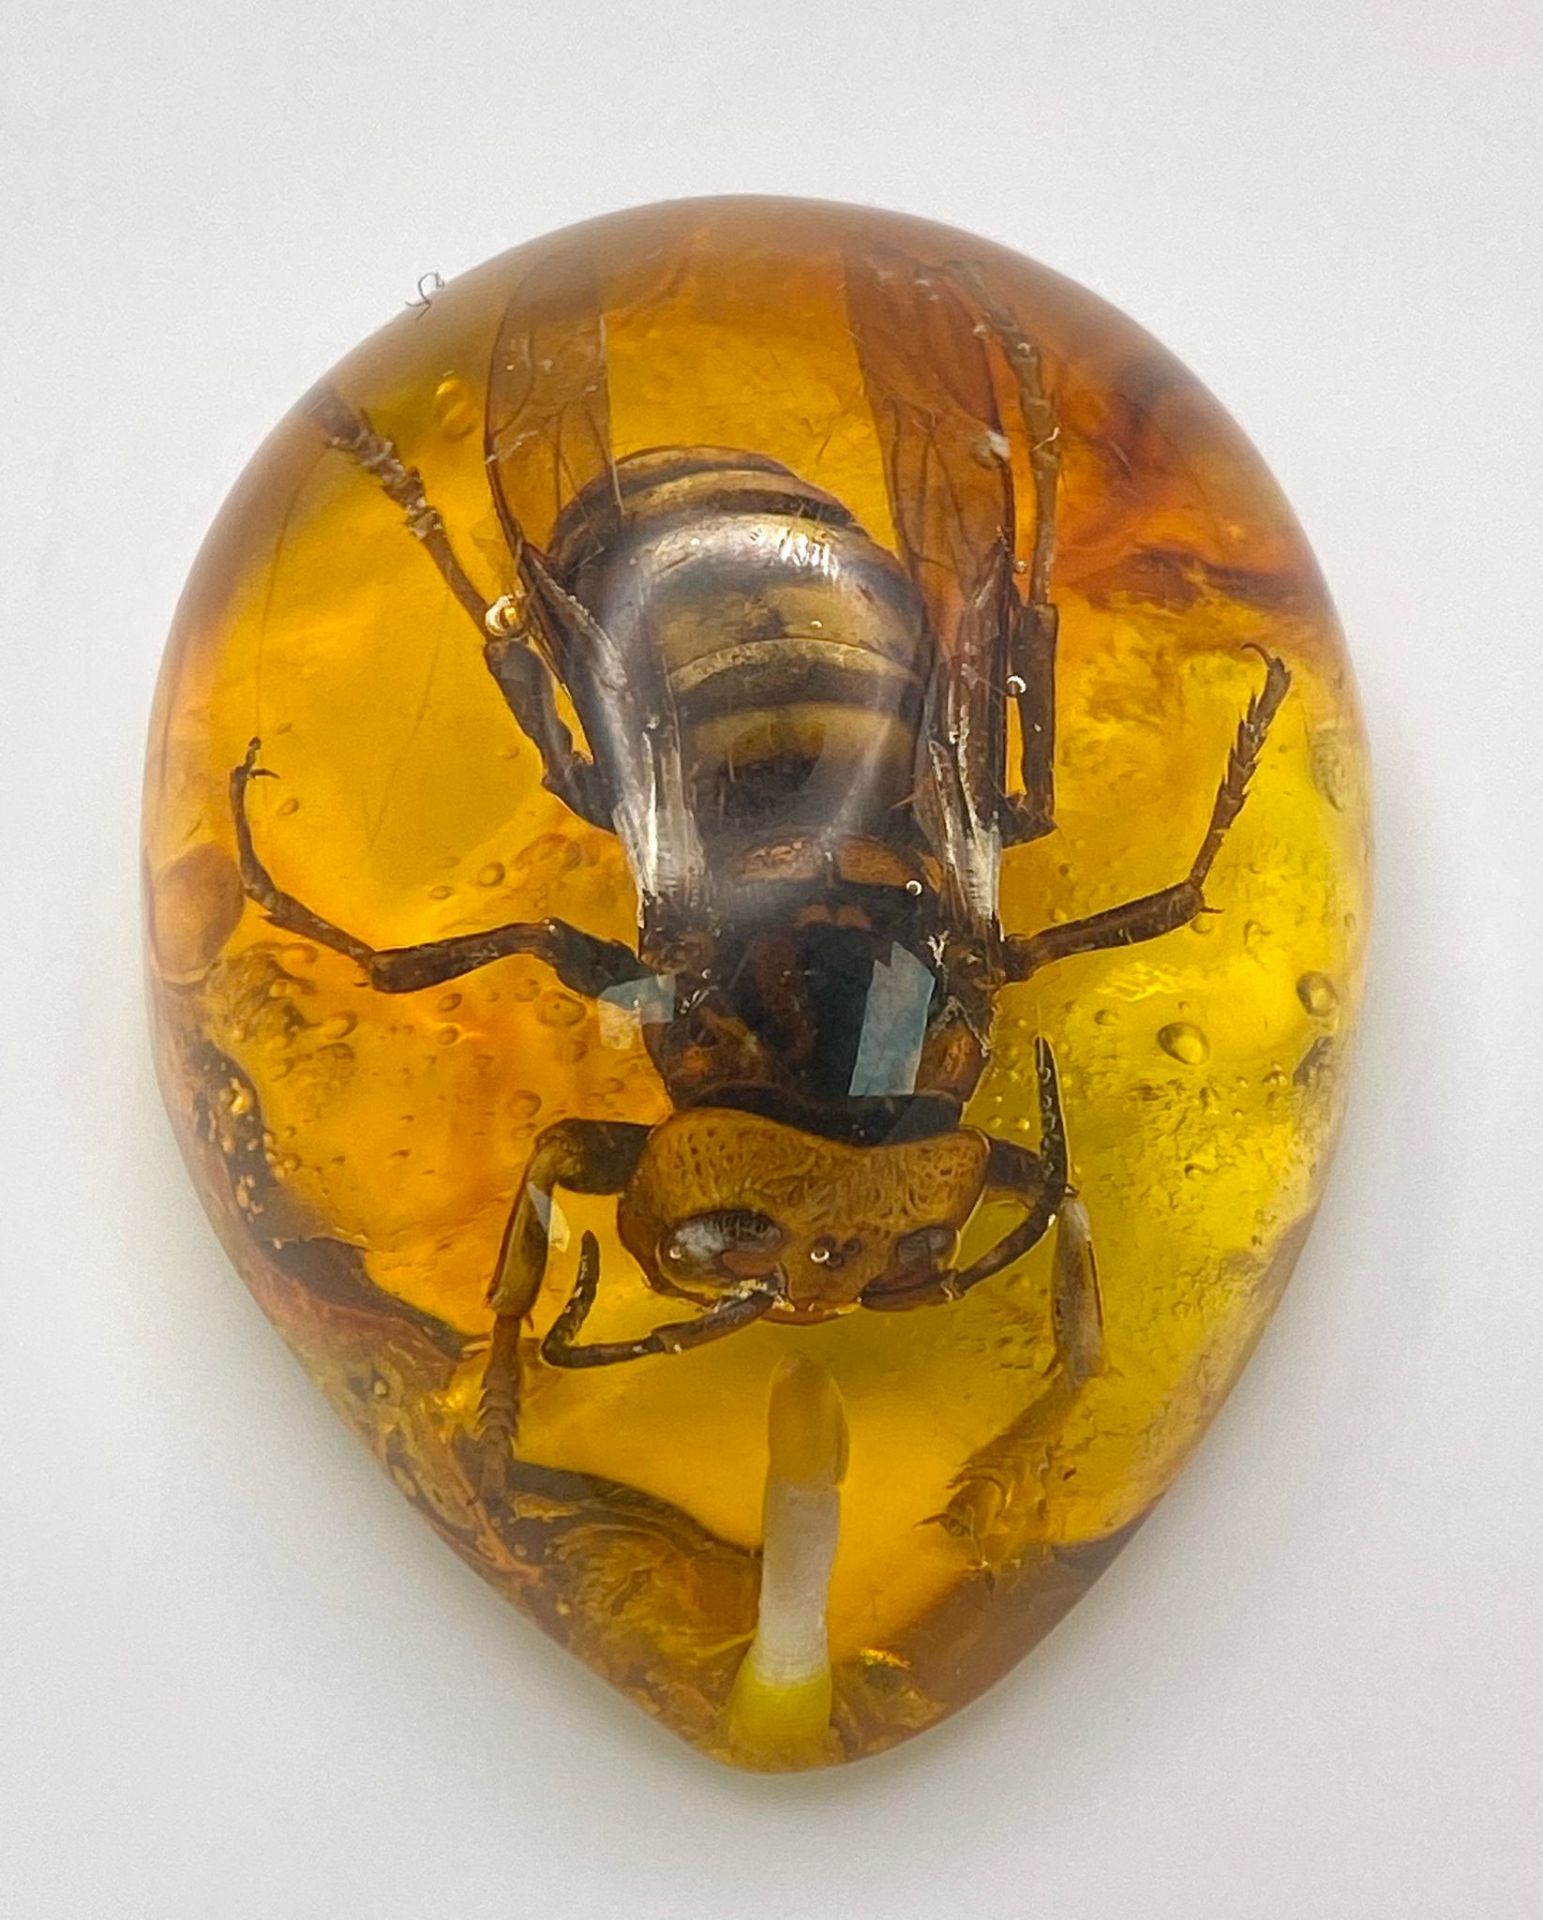 A Humongous Asian Hornet in Amber Resin - Pendant or Paperweight. 6cm - Image 2 of 3